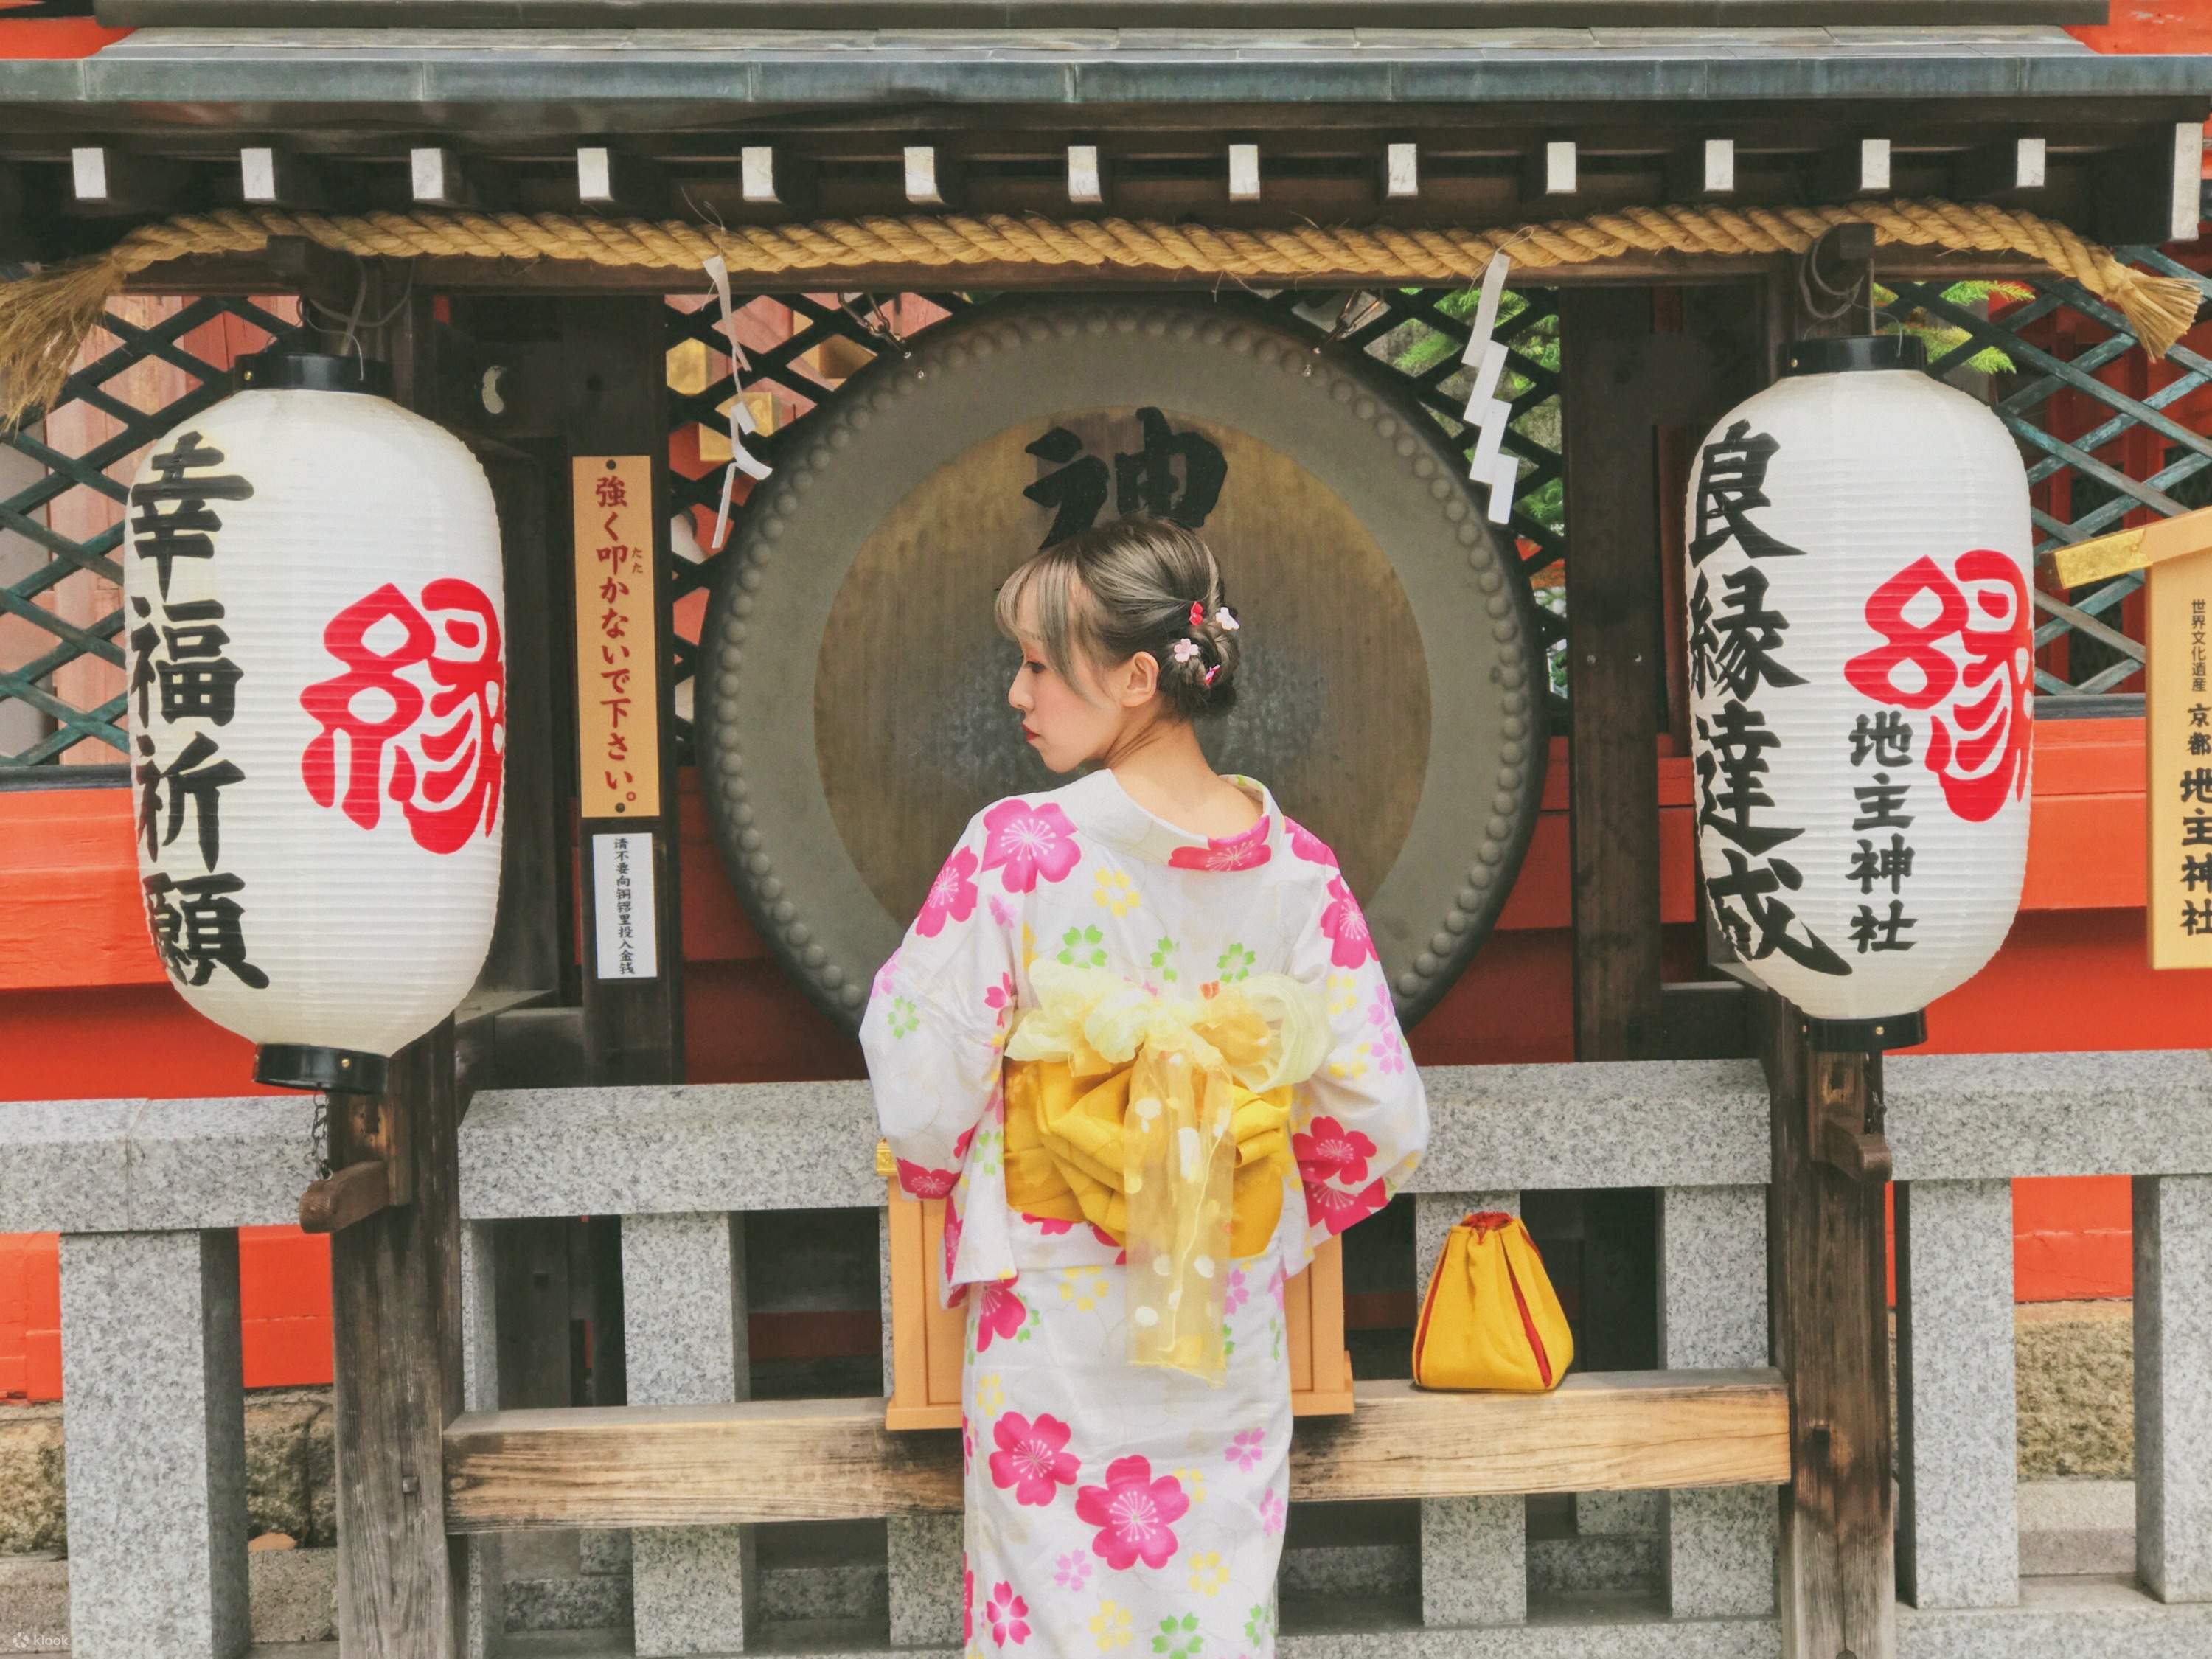 Recommended Experience in Autumn and Winter] Kyoto Kimono Rental Experience  l Chinese, English, Japanese and Korean support okl Close to Kiyomizudera  Temple, the Second Year Board, and the Third Year Board (Kyoto